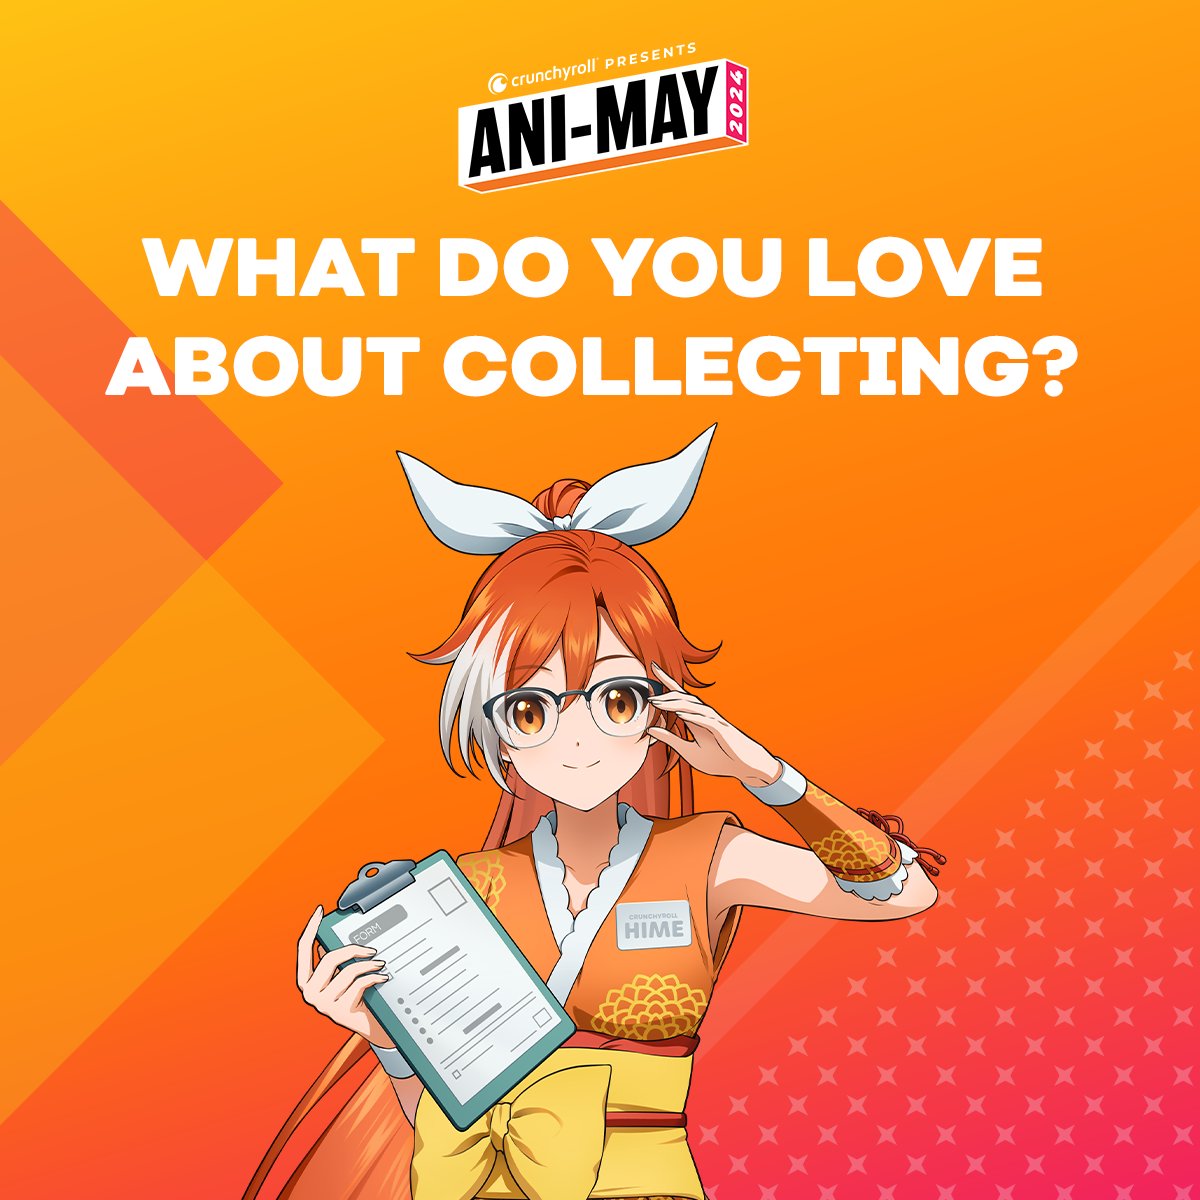 One of the joys of being an anime fan is marveling at your collection. 🤩✨ What do you love about collecting? Tell us in the replies!